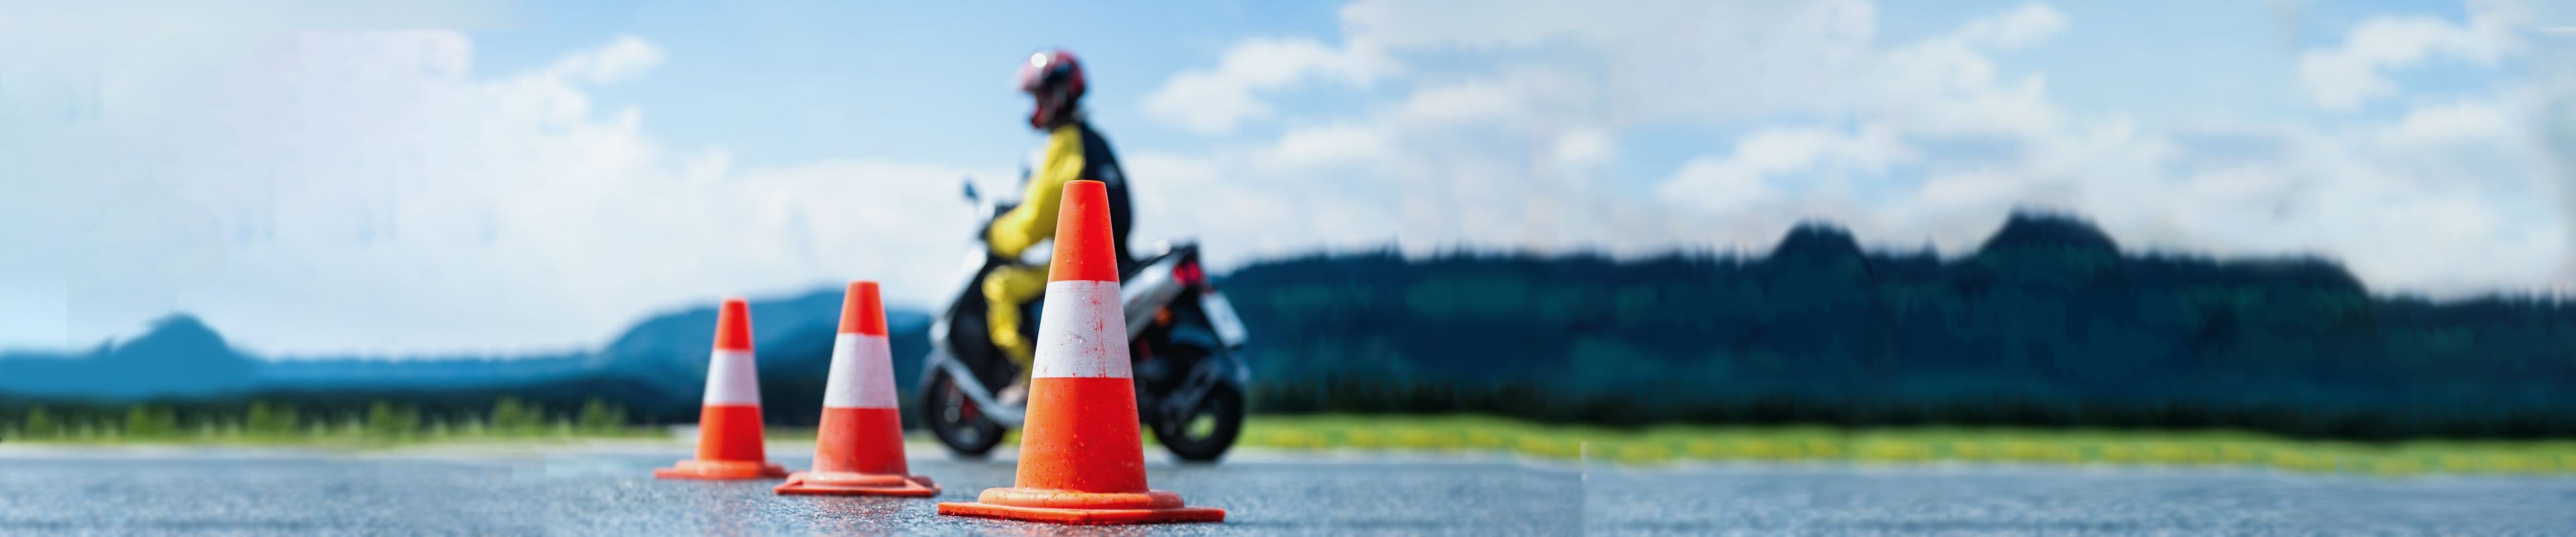 Motorcycle safety training with orange cones